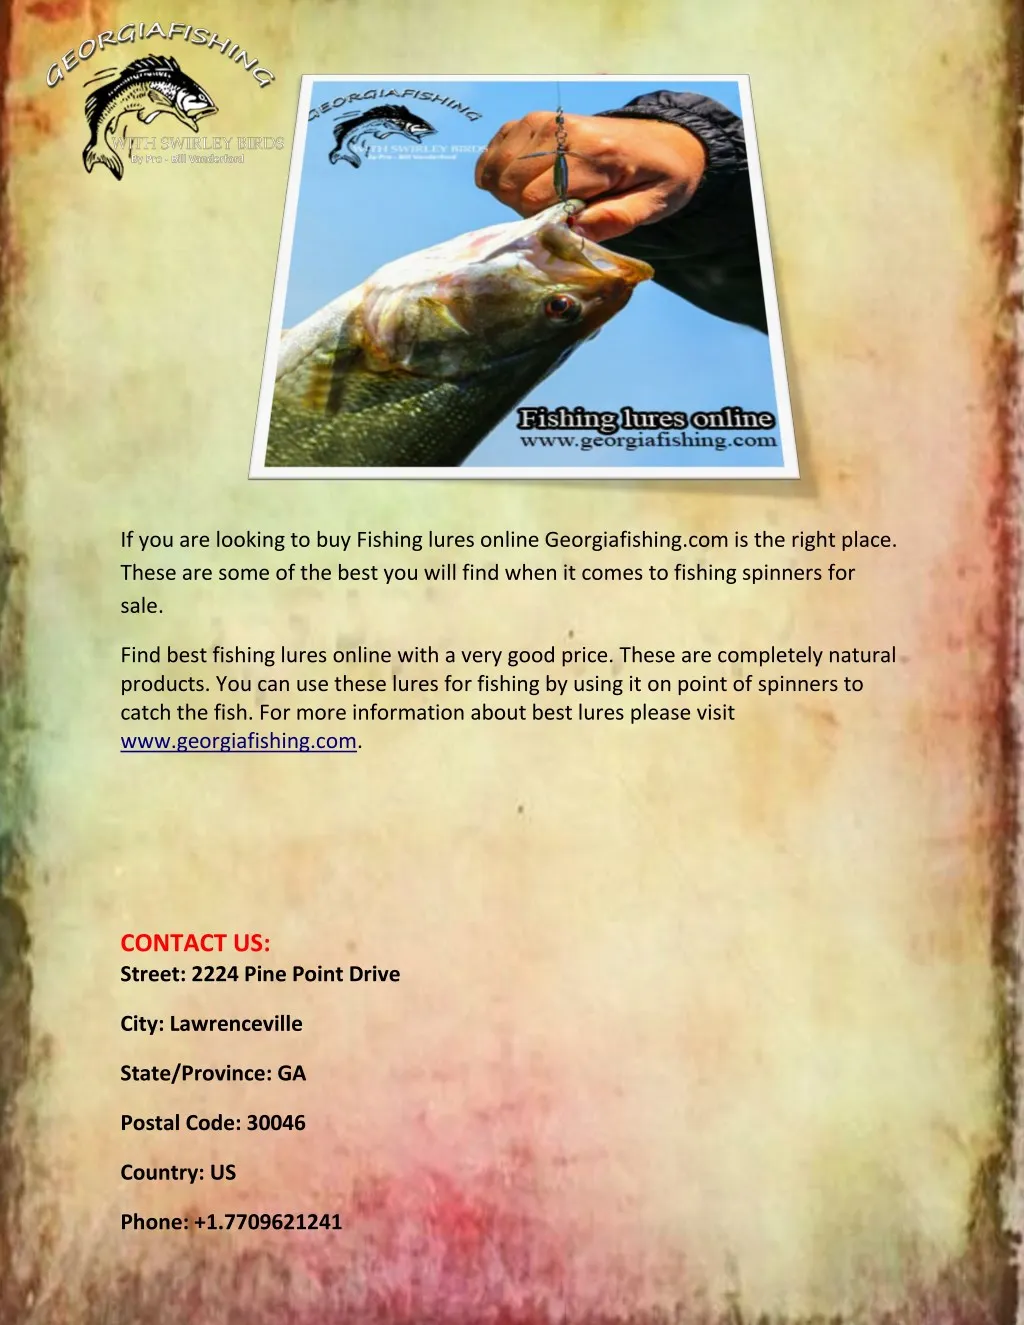 if you are looking to buy fishing lures online